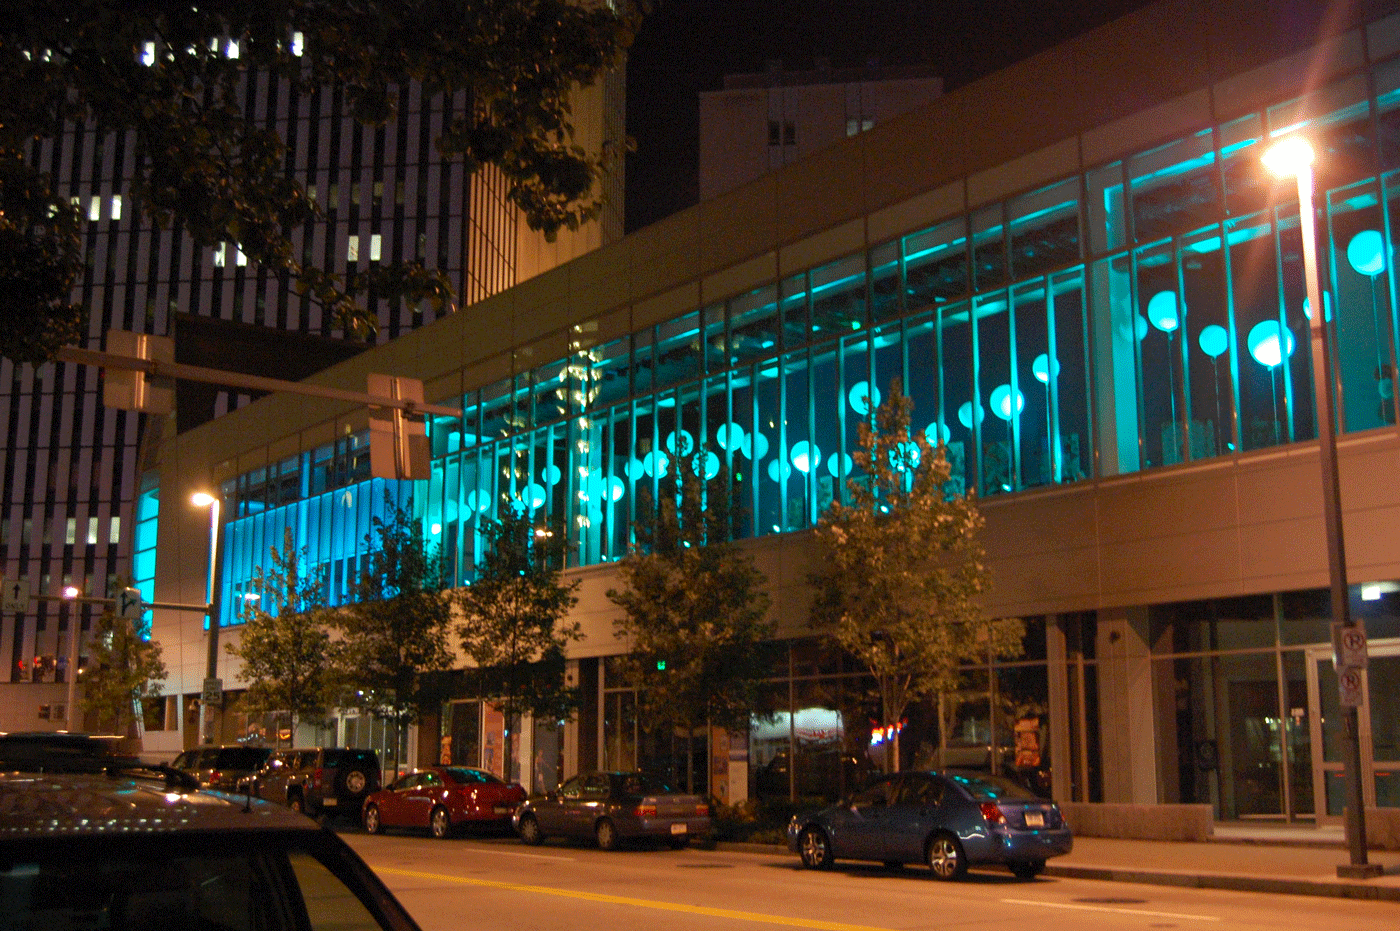 A city building with tall windows is illuminated with blue light and glowing orbs